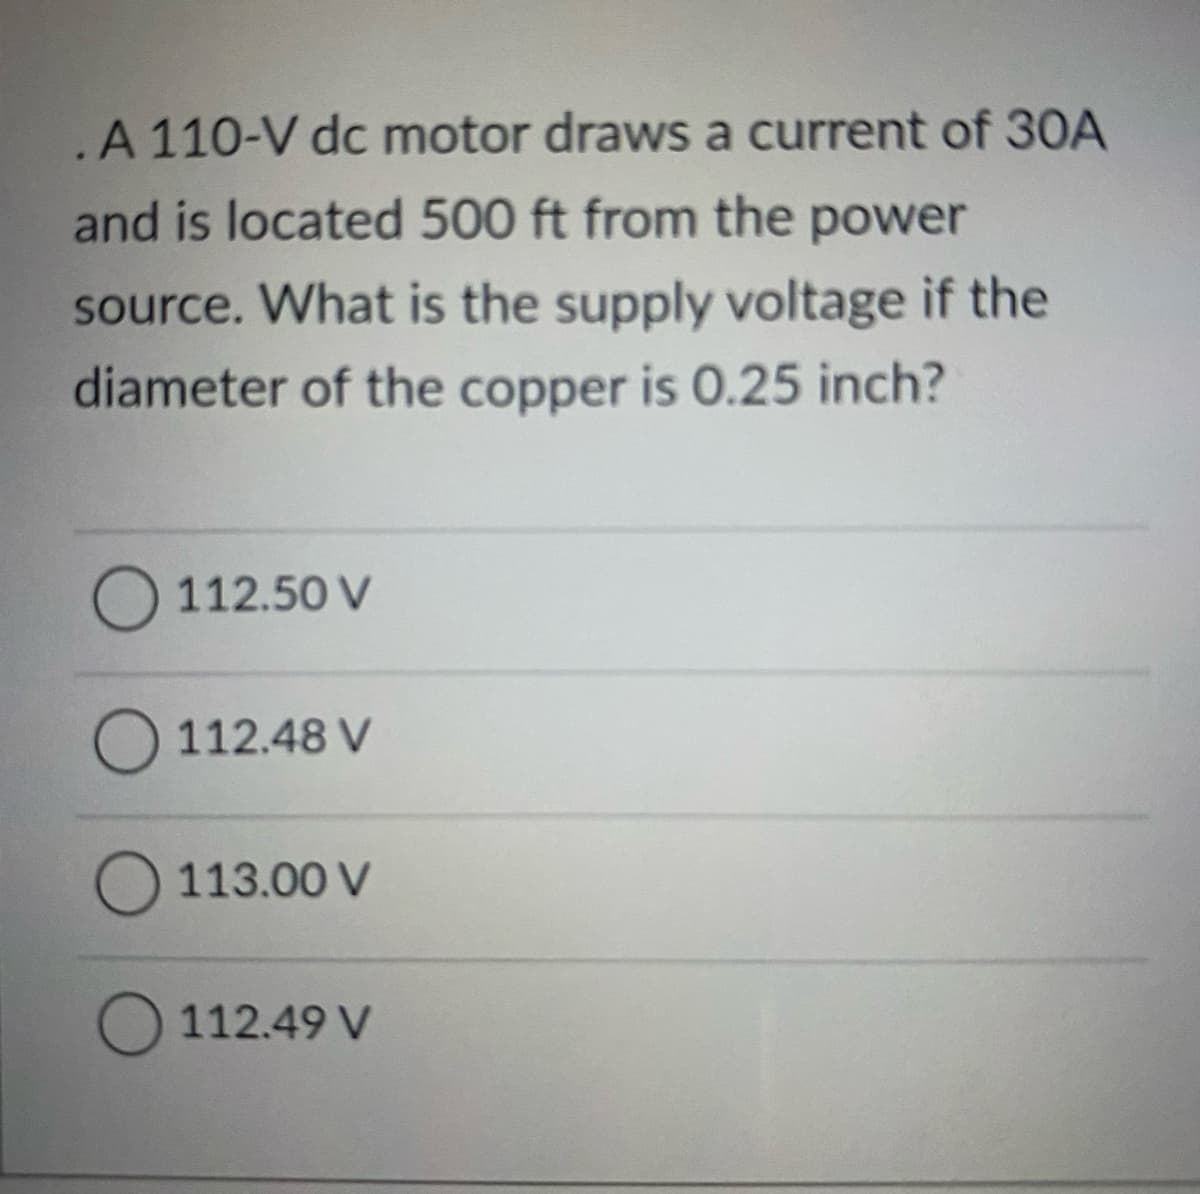 A 110-V dc motor draws a current of 30A
and is located 500 ft from the power
source. What is the supply voltage if the
diameter of the copper is 0.25 inch?
O 112.50 V
112.48 V
O 113.00 V
112.49 V
